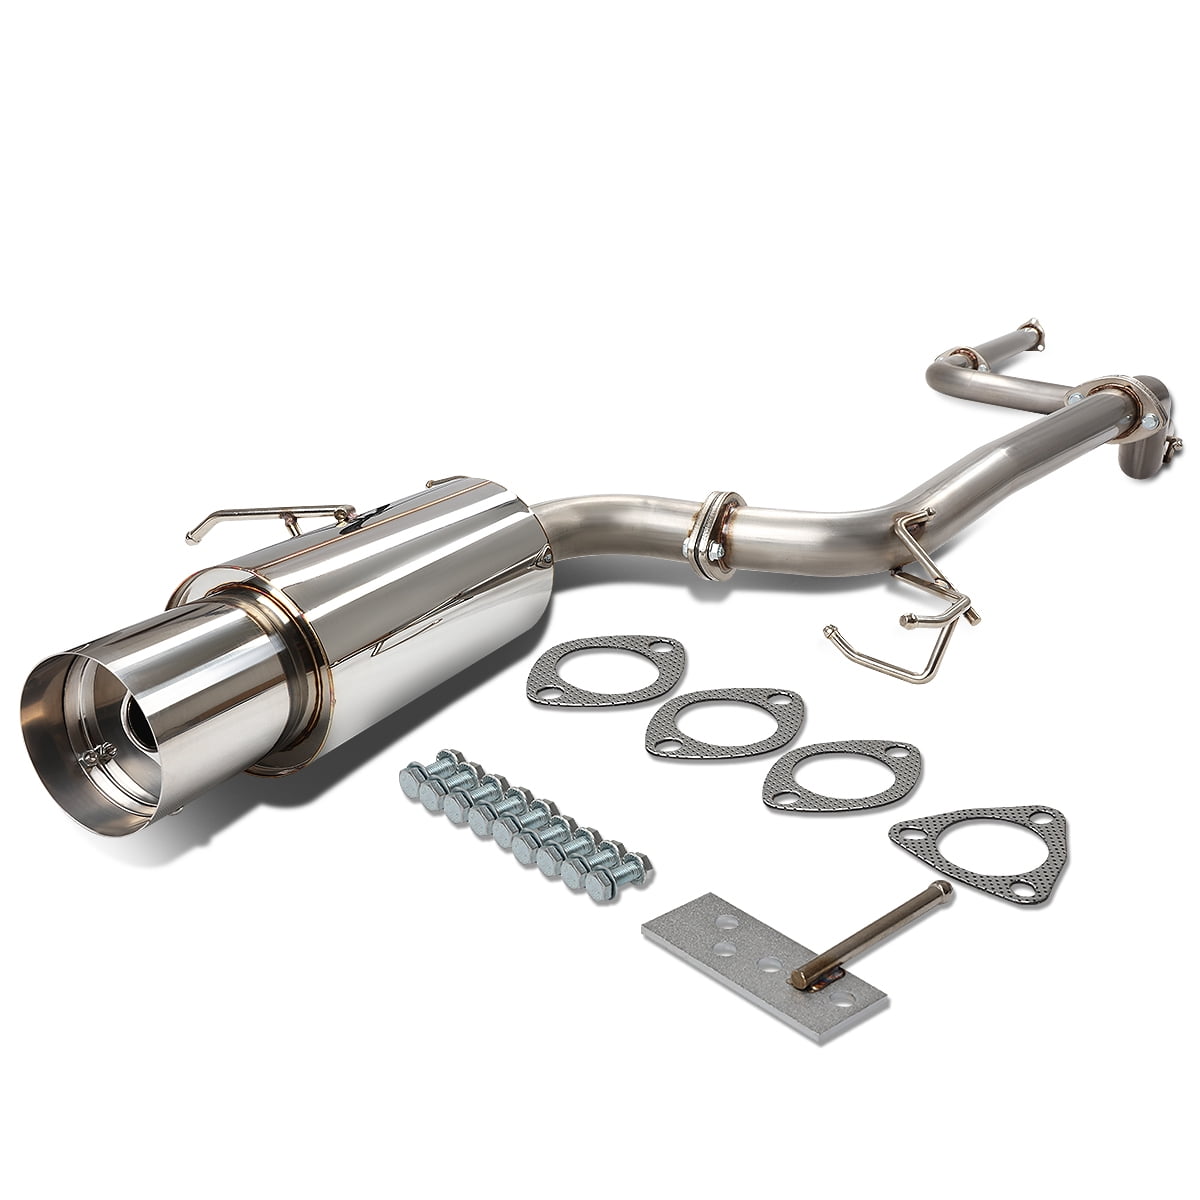 BLACK Rxmotor 2.5 to 3 Piping Catback Exhaust System with 4.5 N1 Burn Tip For Acura Integra Ls Rs Gs